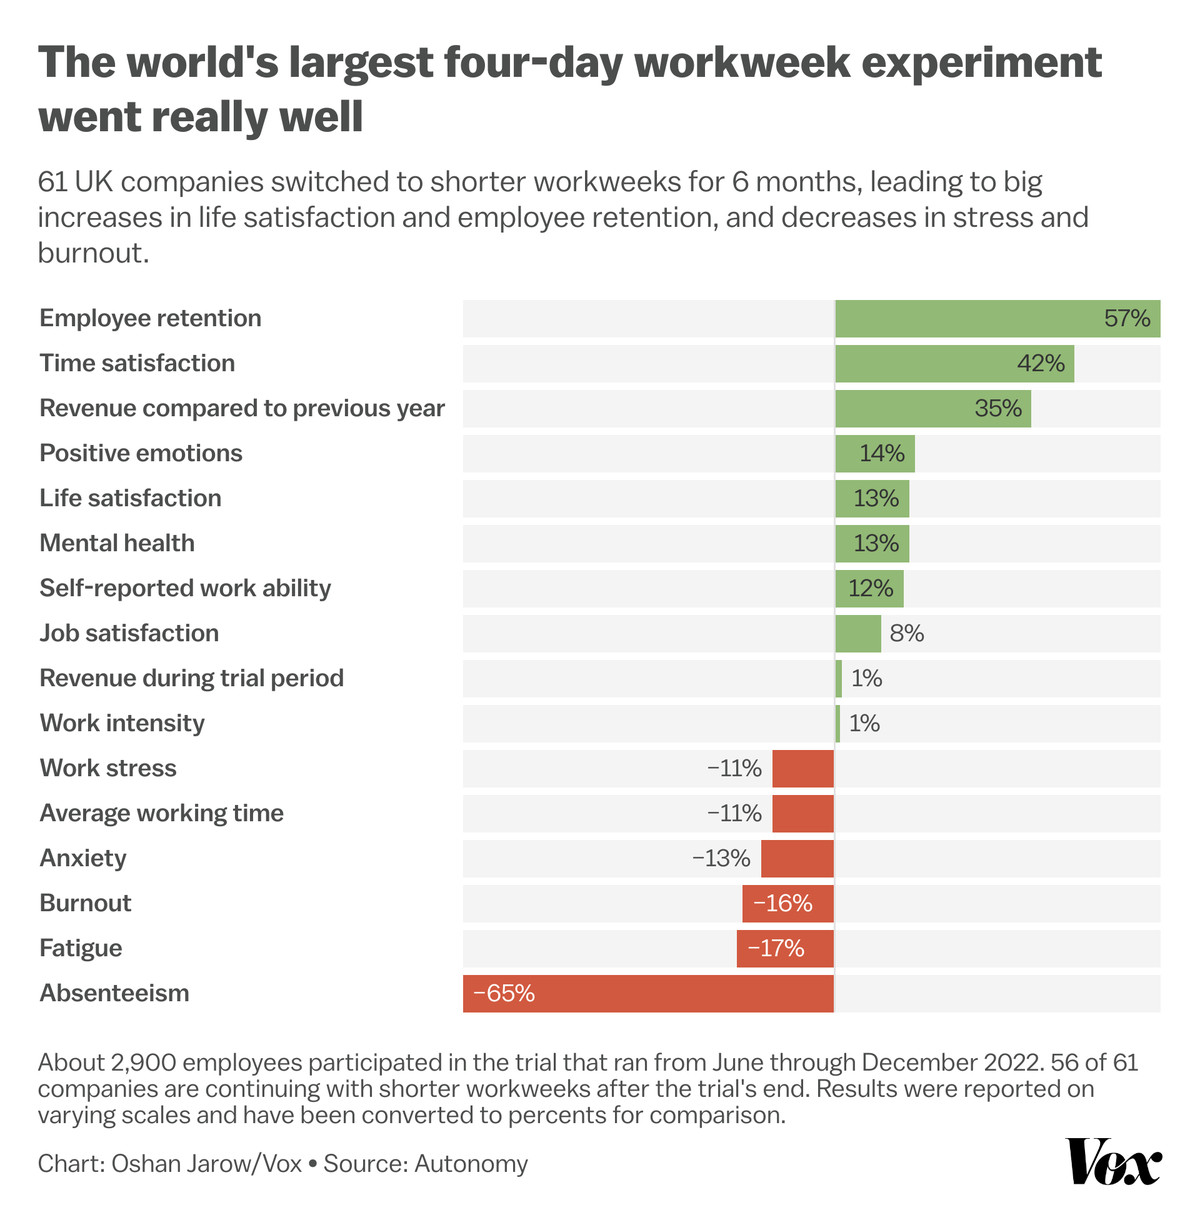 A table visualizing the world’s largest four-day workweek experiment demonstrates a marked increase in life satisfaction and employee retention and decreases in stress and burnout. 